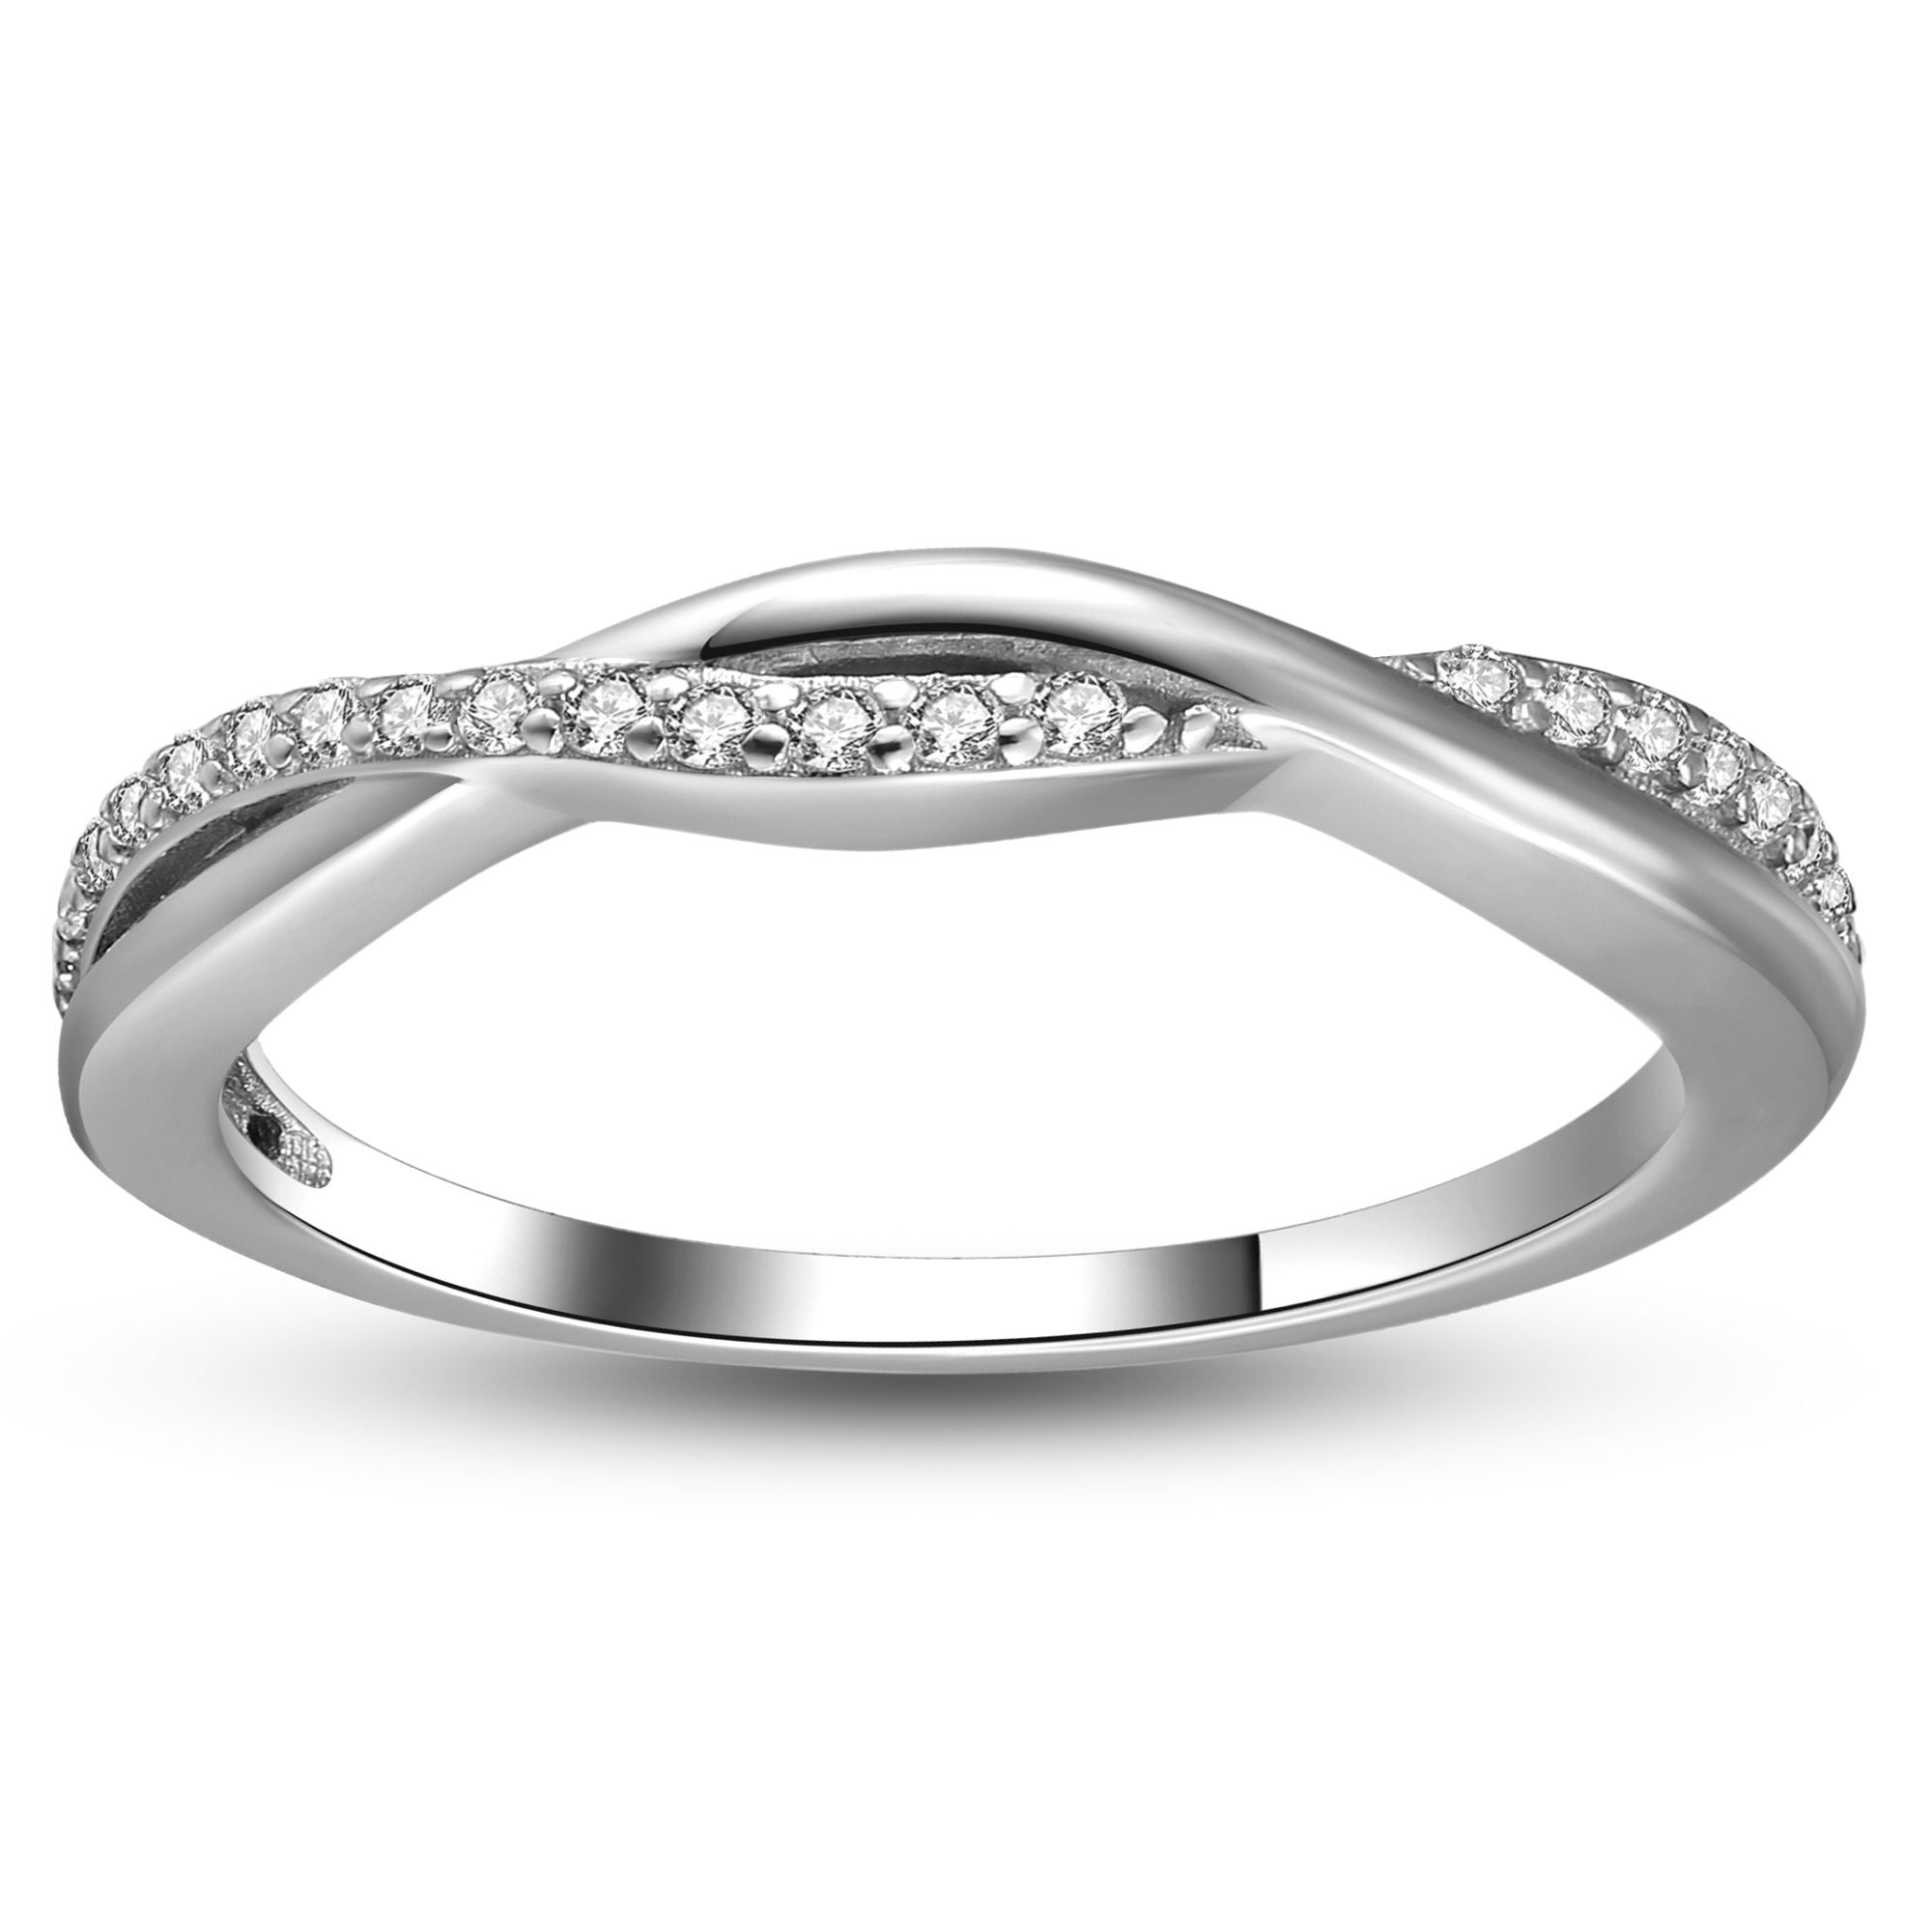 Sterling Silver Wedding Band for Women Half Eternity Cz Anniversary Ring by Ginger Lyne Collection - Silver,9.5